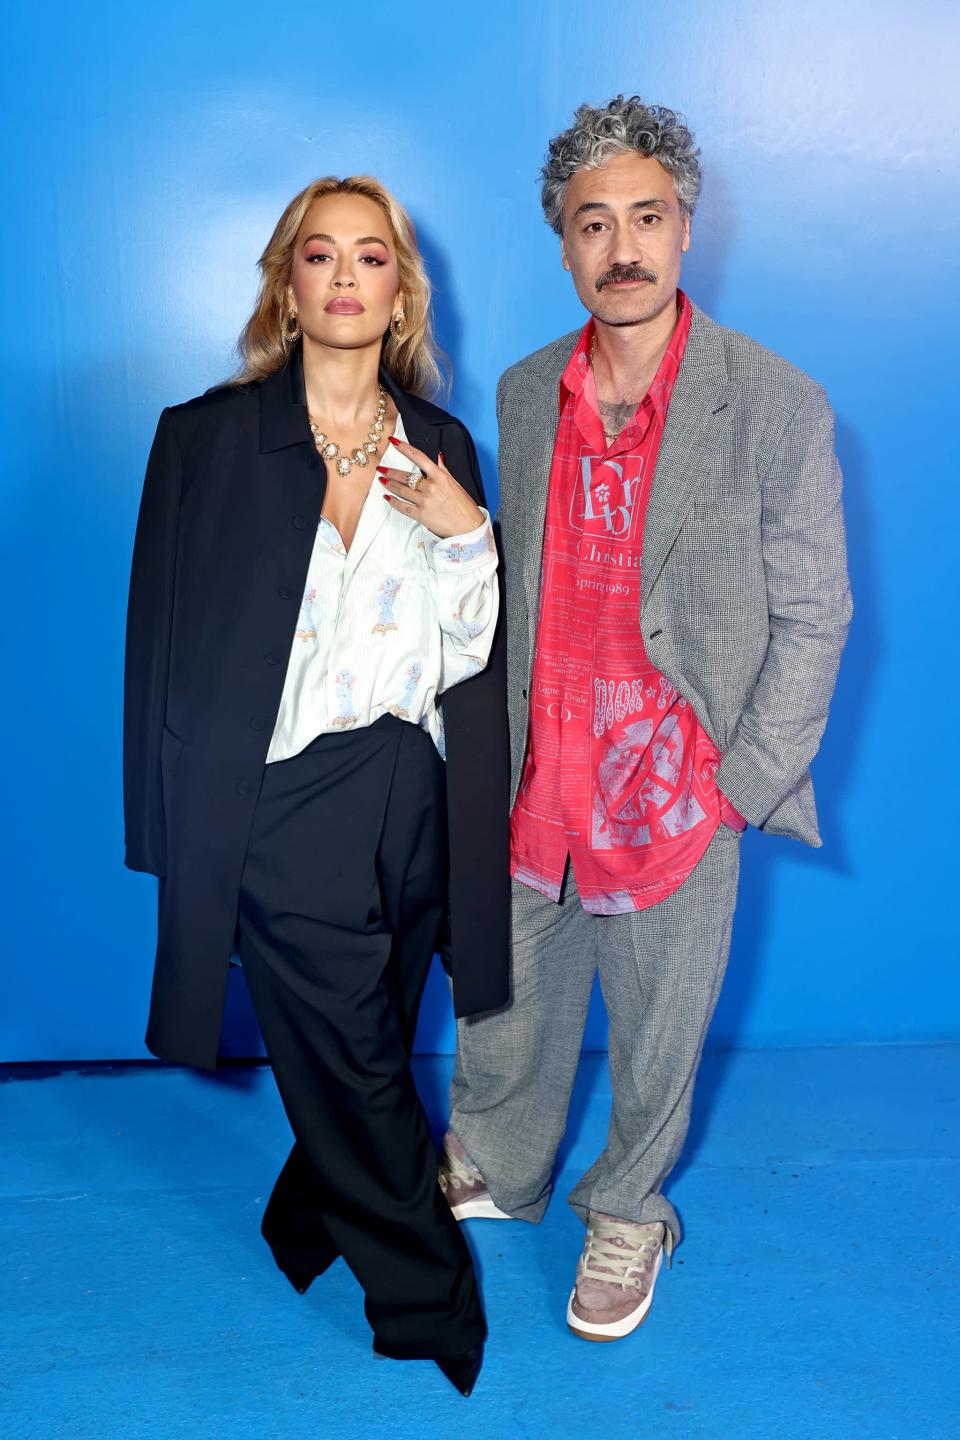 <p>Waititi and Ora initially sparked dating rumors in April 2021 when <a href="http://www.instagram.com/p/CN7nJaBjSZe/?utm_source=ig_web_copy_link" class="link " rel="nofollow noopener" target="_blank" data-ylk="slk:Ora shared a picture of the two embracing">Ora shared a picture of the two embracing</a> on Instagram with the caption, "Good times, memories, random things on my phone and the ones I love." Regarding their relationship, a source told <a href="https://www.thesun.co.uk/tvandshowbiz/14765814/rita-ora-dating-director-taika-waititi-month-sydney/" class="link " rel="nofollow noopener" target="_blank" data-ylk="slk:The Sun">The Sun</a> at the time, "They've been a couple since early March but kept things low key. However, all their friends know about the relationship - they're really into each other." </p> <p>One month after Ora's Instagram post, <a href="https://www.dailymail.co.uk/tvshowbiz/article-9610391/Rita-Ora-Taika-Waititi-pack-PDA-cosy-Tessa-Thompson-night-party.html" class="link " rel="nofollow noopener" target="_blank" data-ylk="slk:The Daily Mail">The Daily Mail</a> reported the pair were not only together but that they were also getting cozy with actress Tessa Thompson. Pictures of the trio showed all three sharing kisses with one another, which, quite frankly, broke the internet. As for Waititi, he didn't think it was all that big a deal. On the pictures and rumors of being a throuple with Thompson, Waititi told <a href="https://www.smh.com.au/culture/movies/in-the-world-of-the-internet-everything-goes-away-pretty-quick-taika-waititi-20210604-p57y1o.html" class="link " rel="nofollow noopener" target="_blank" data-ylk="slk:The Sydney Morning Herald">The Sydney Morning Herald</a>, "Is it that big a deal? No, not really. I was doing nothing wrong. It's fine."</p> <p>Waititi and Ora have stuck together through relentless paparazzi and media buzz, and they're apparently even in the process of planning a <span class="nofilter">wedding</span>. According to <a href="https://www.the-sun.com/entertainment/5512174/rita-ora-secretly-marry-taika-waititi/" class="link " rel="nofollow noopener" target="_blank" data-ylk="slk:The Sun">The Sun</a>, the pair recently got engaged and have plans to marry in an intimate ceremony, then have a showstopping celebration later in the year after their work projects wrap up.</p>